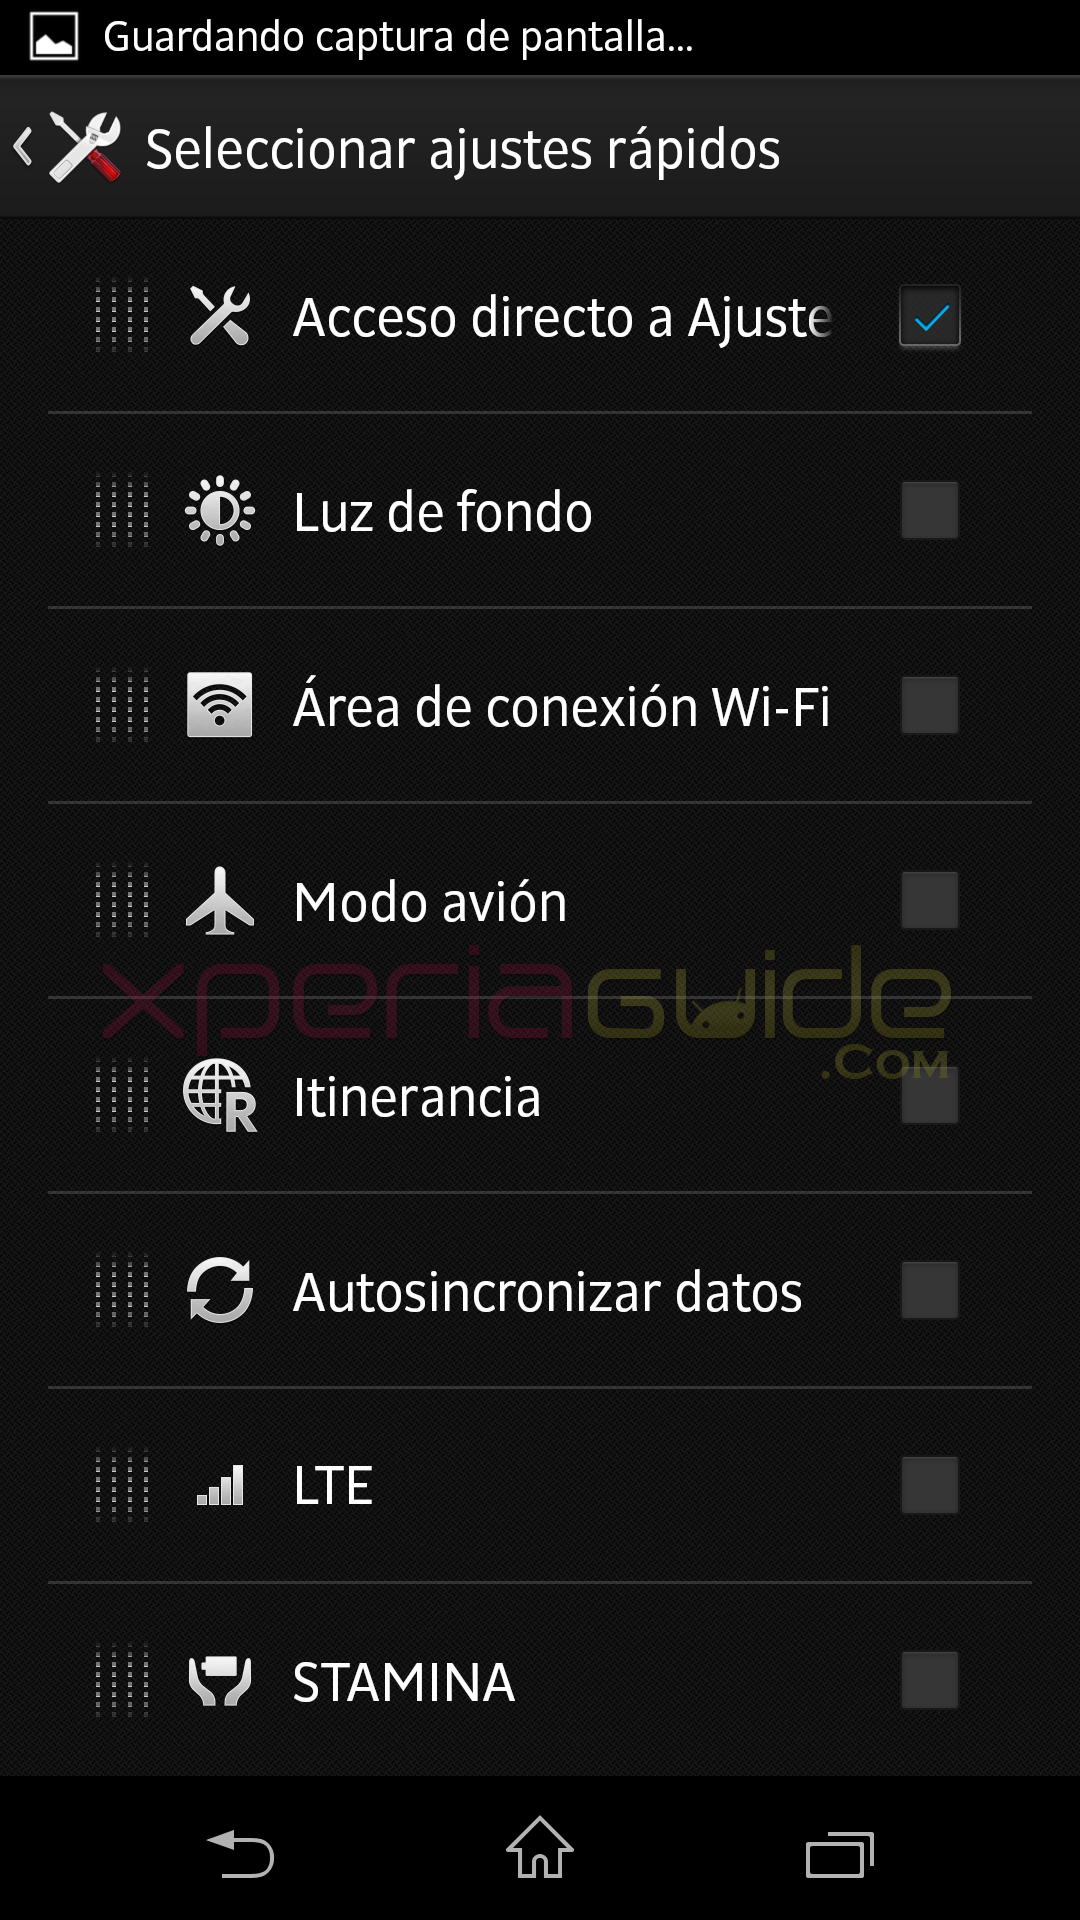 Quick Settings options in Xperia Z C6603 Android 4.2.2 Jelly Bean 10.3.A.0.423